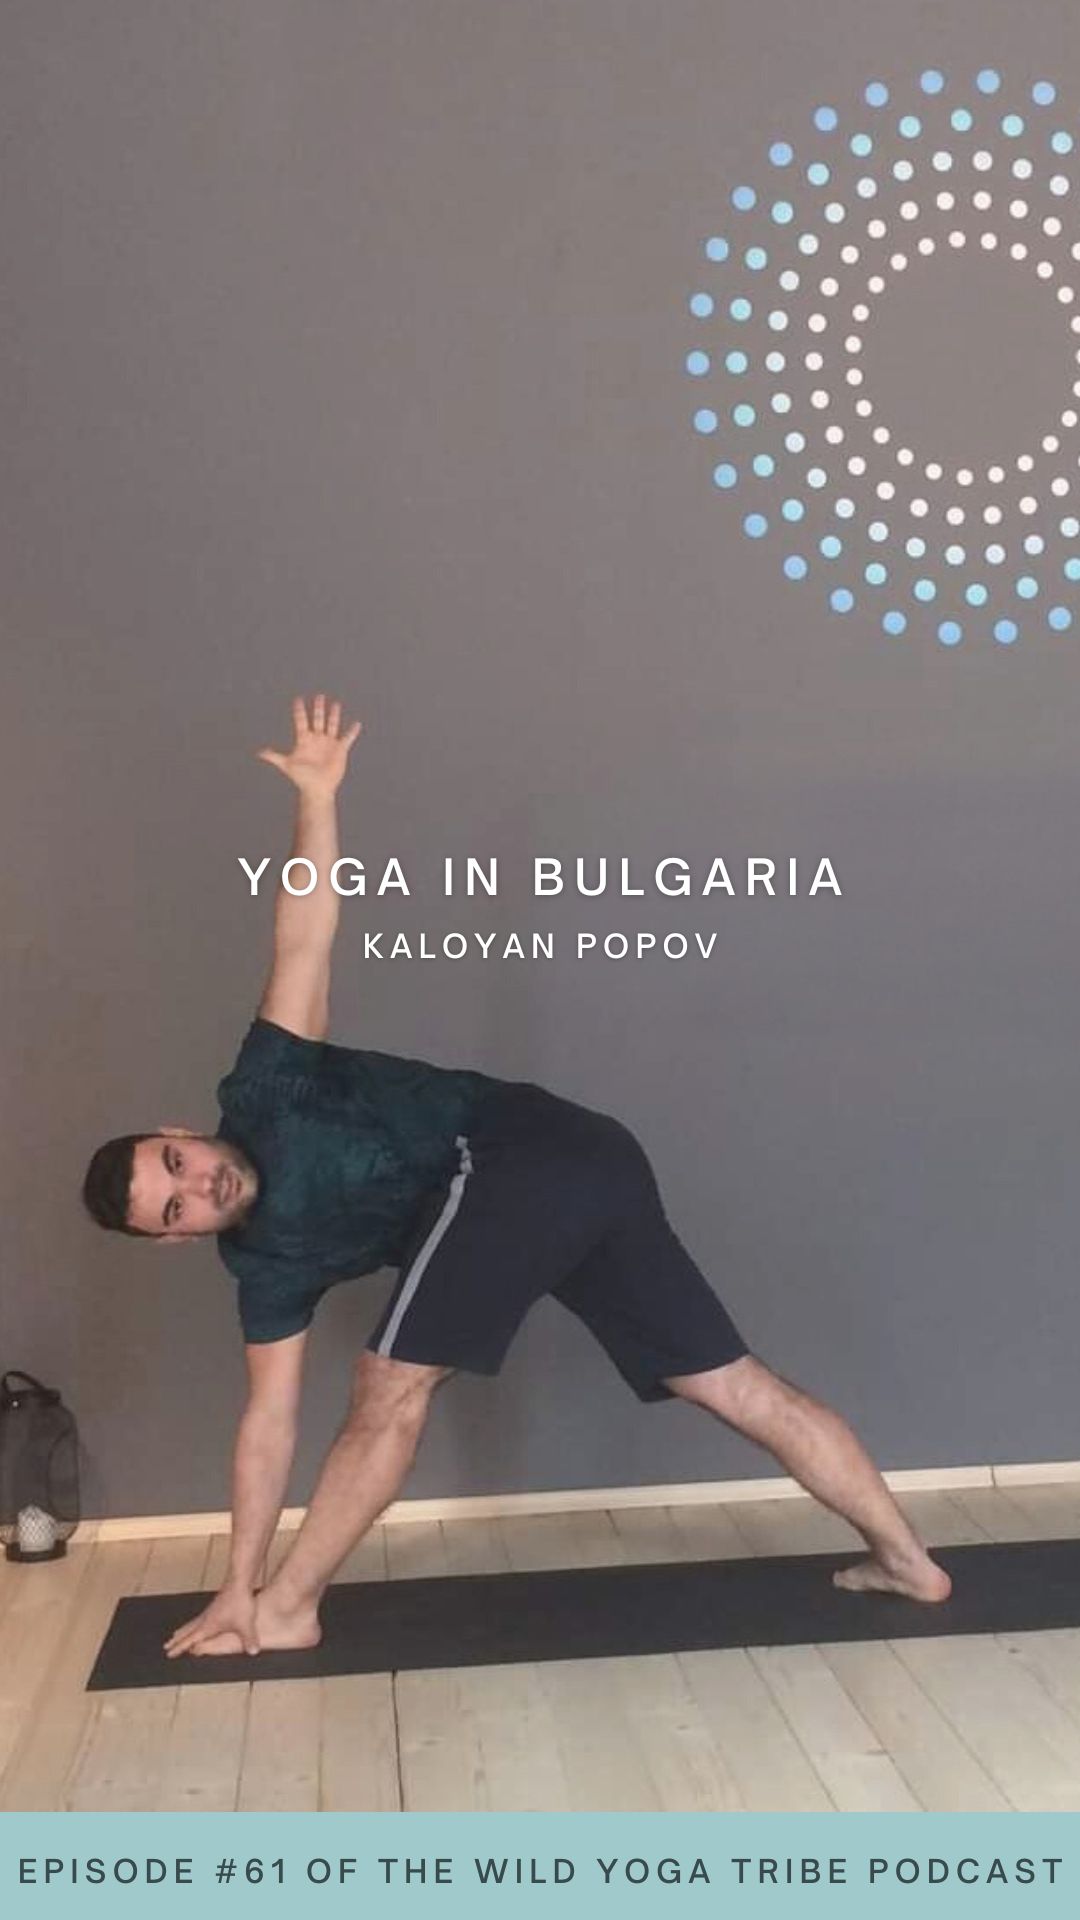 Meet Kaloyan Popov in a yoga teacher from Bulgaria who is putting science to yoga to show people that yoga is more than the stereotypes people may have in their heads. Welcome to yoga in Bulgaria!